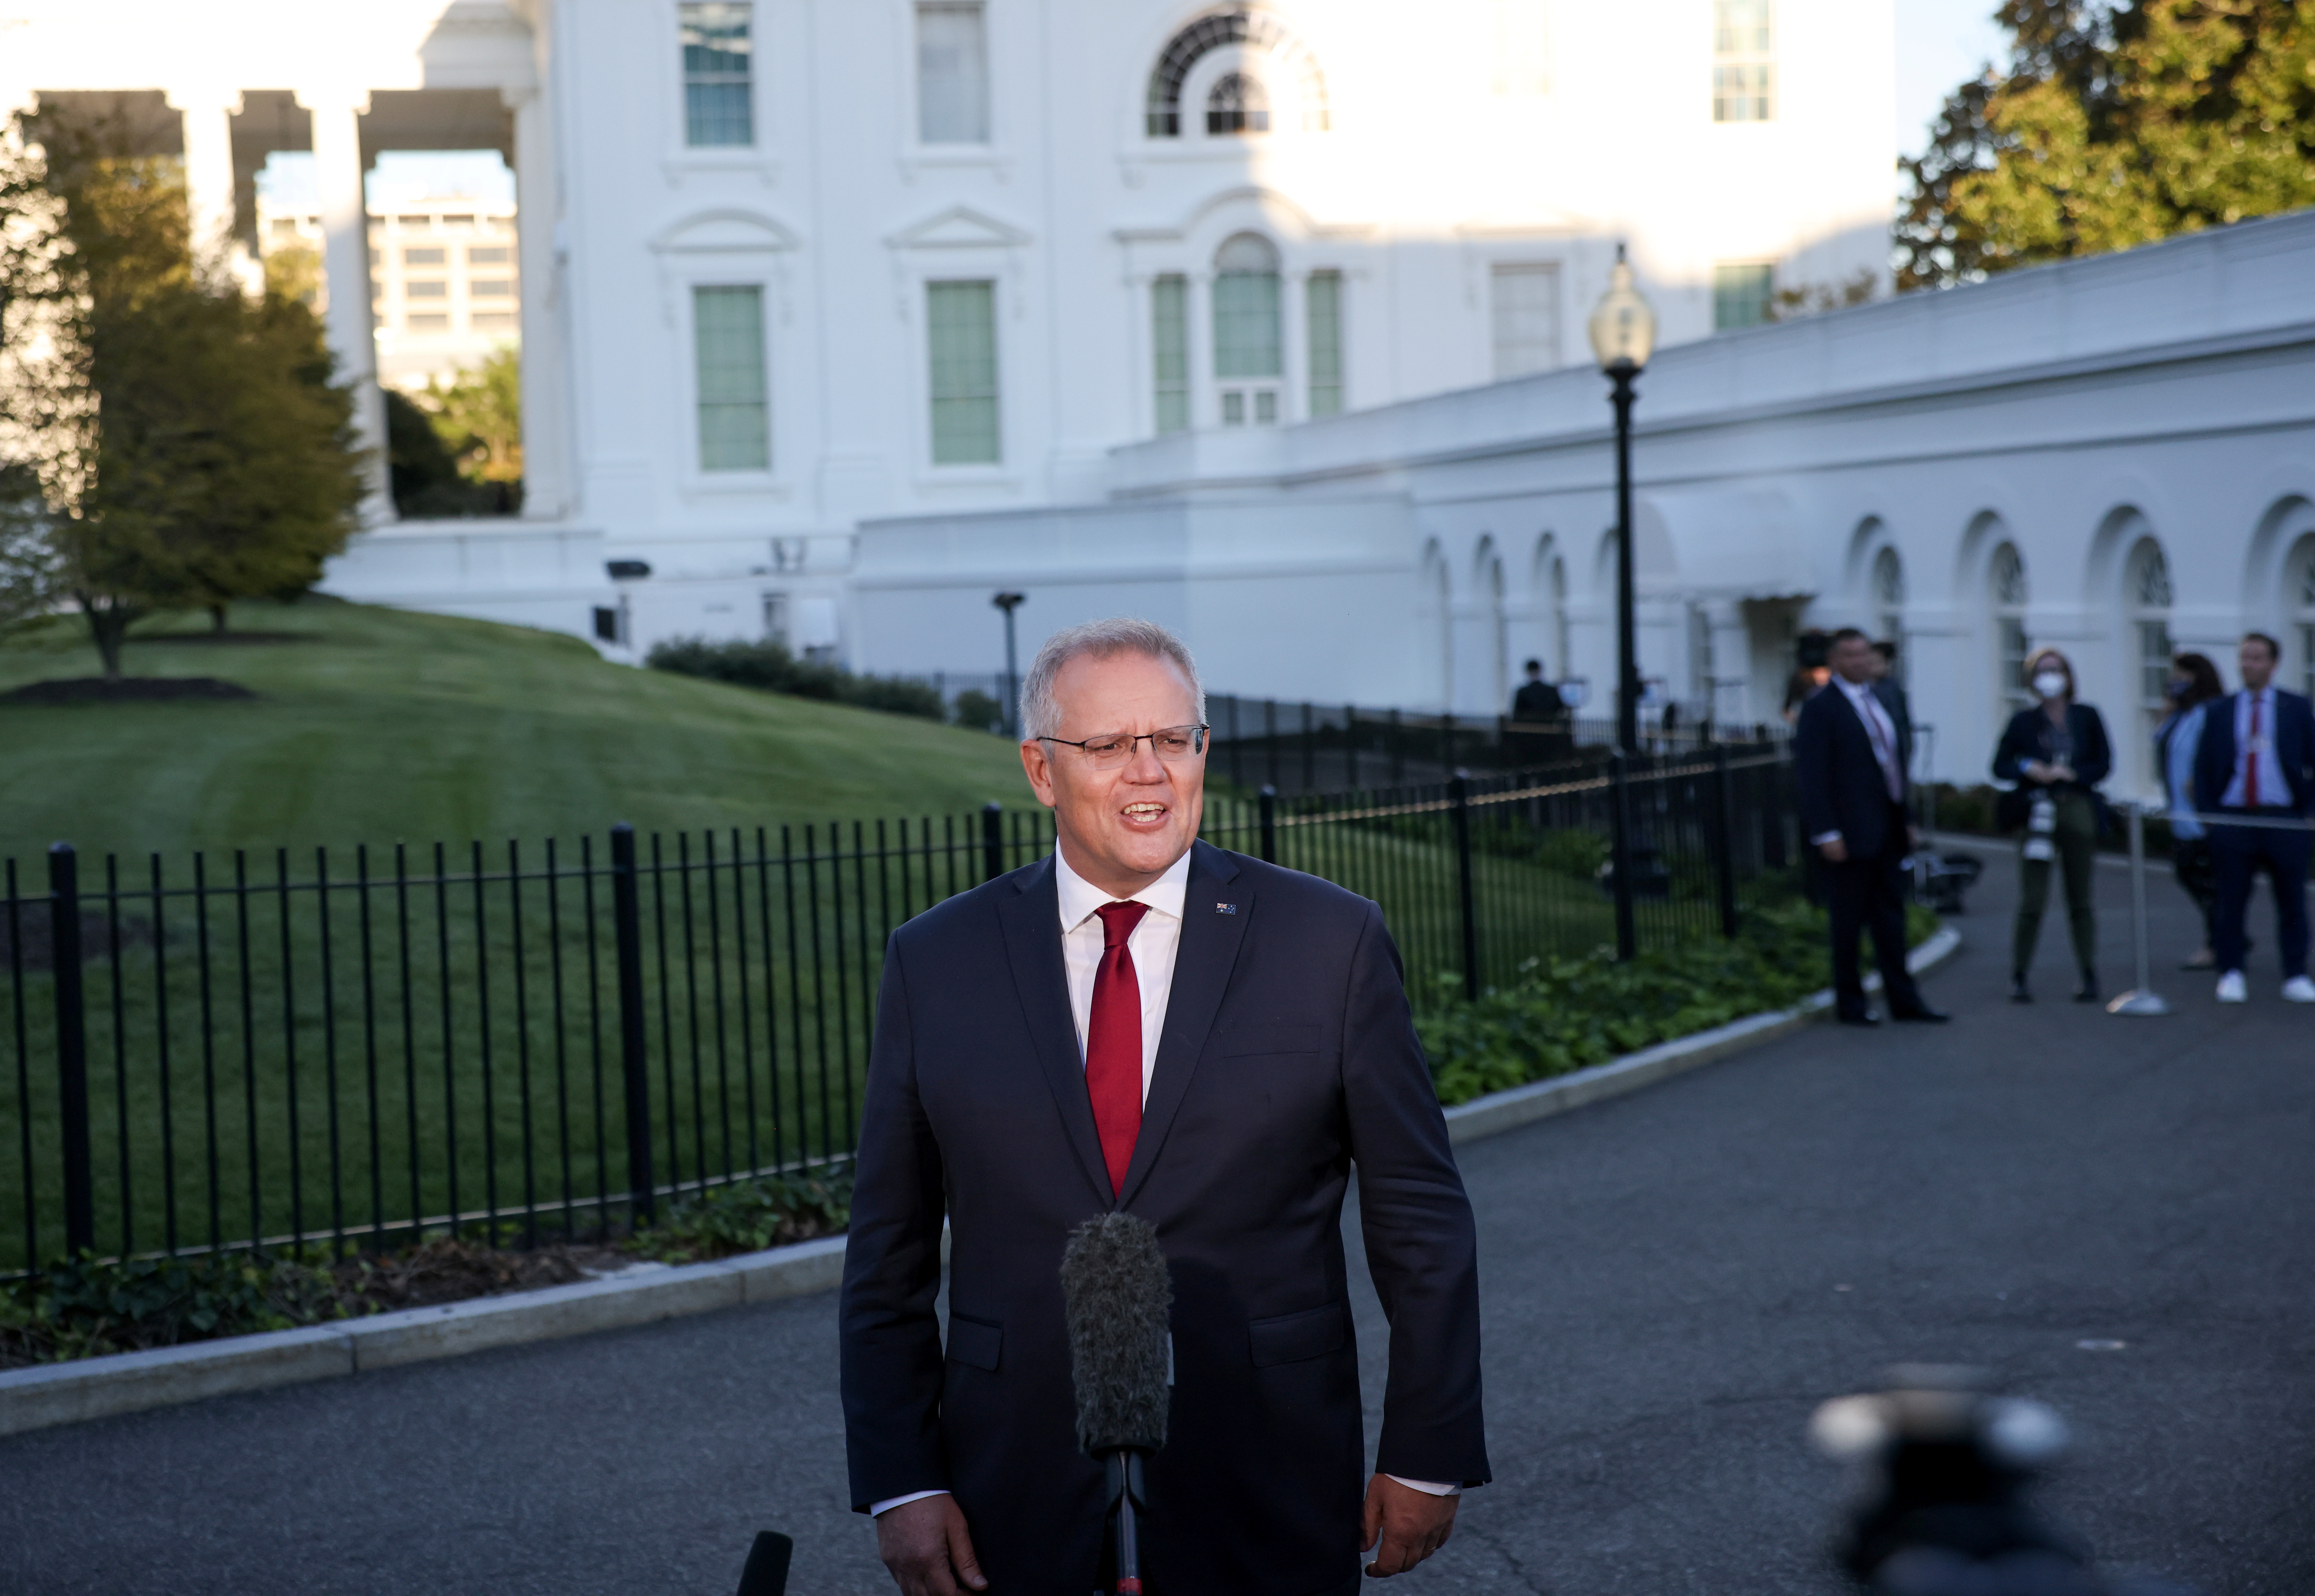 Australia's Prime Minister Scott Morrison speaks with the media following a day of meetings with foreign counterparts at the White House in Washington, U.S., September 24, 2021. REUTERS/Evelyn Hockstein